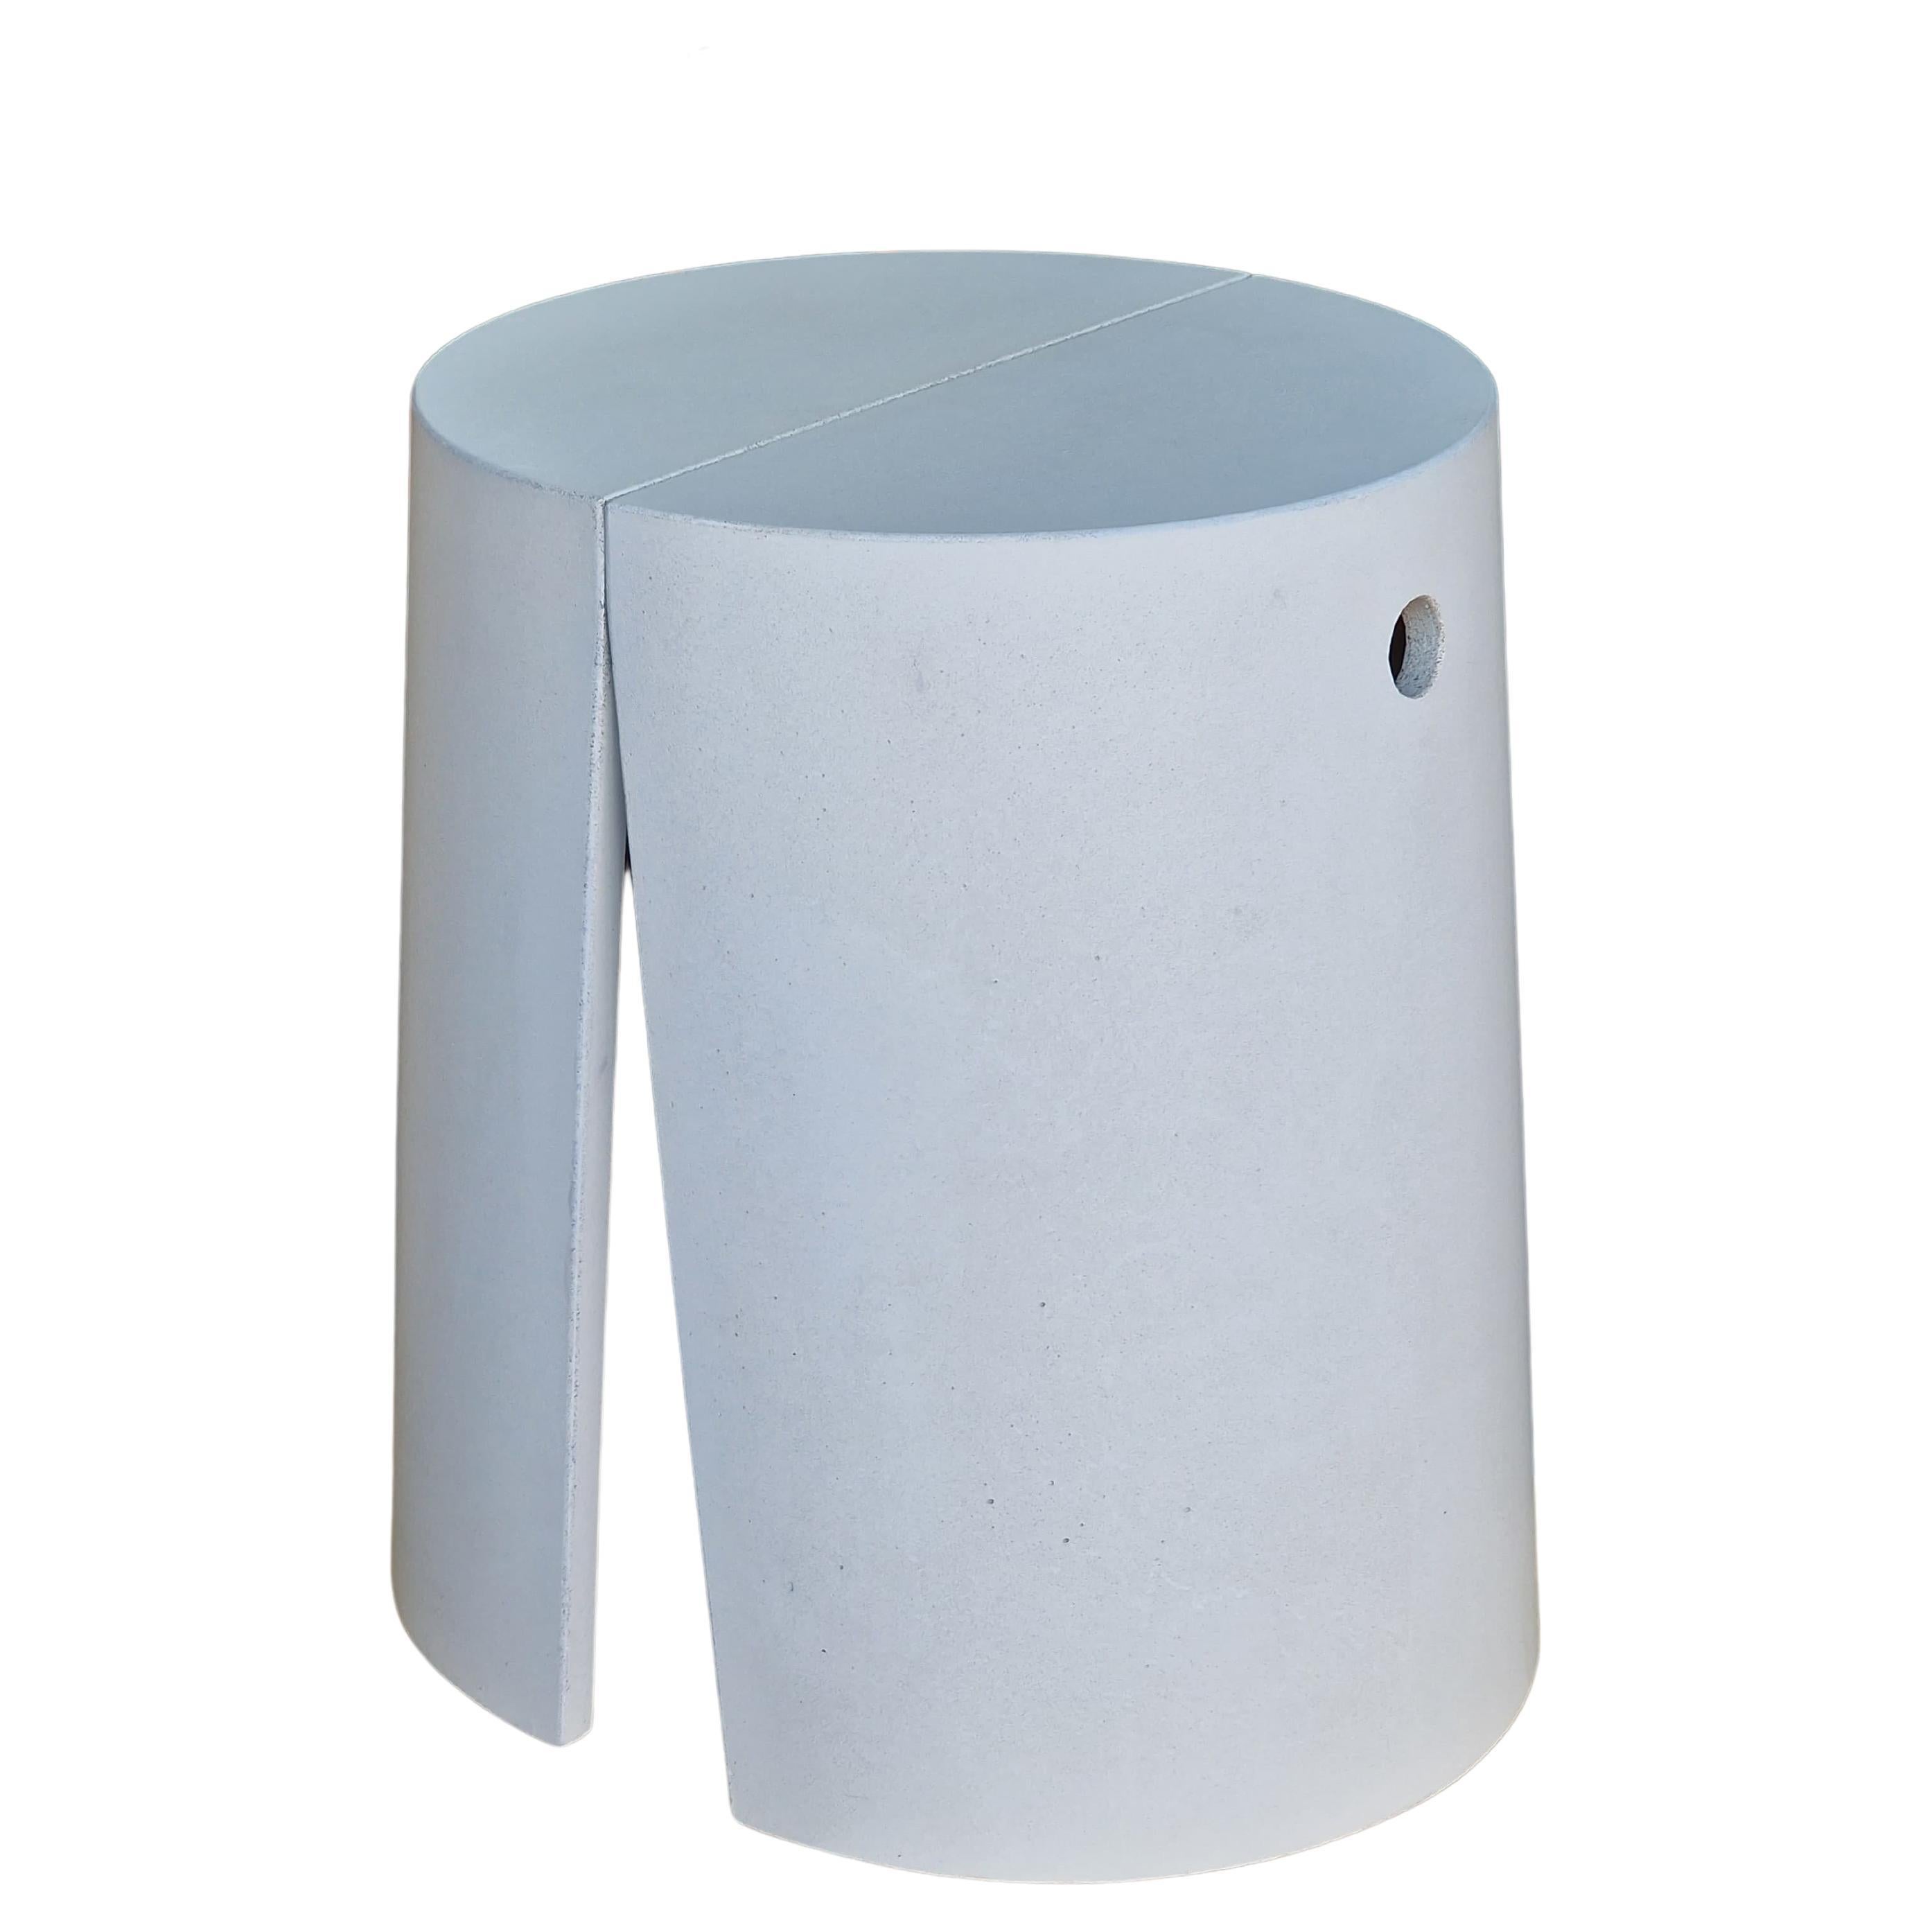 Varco Concrete Stool by Ernesto Messineo in White Shade for Forma&Cemento